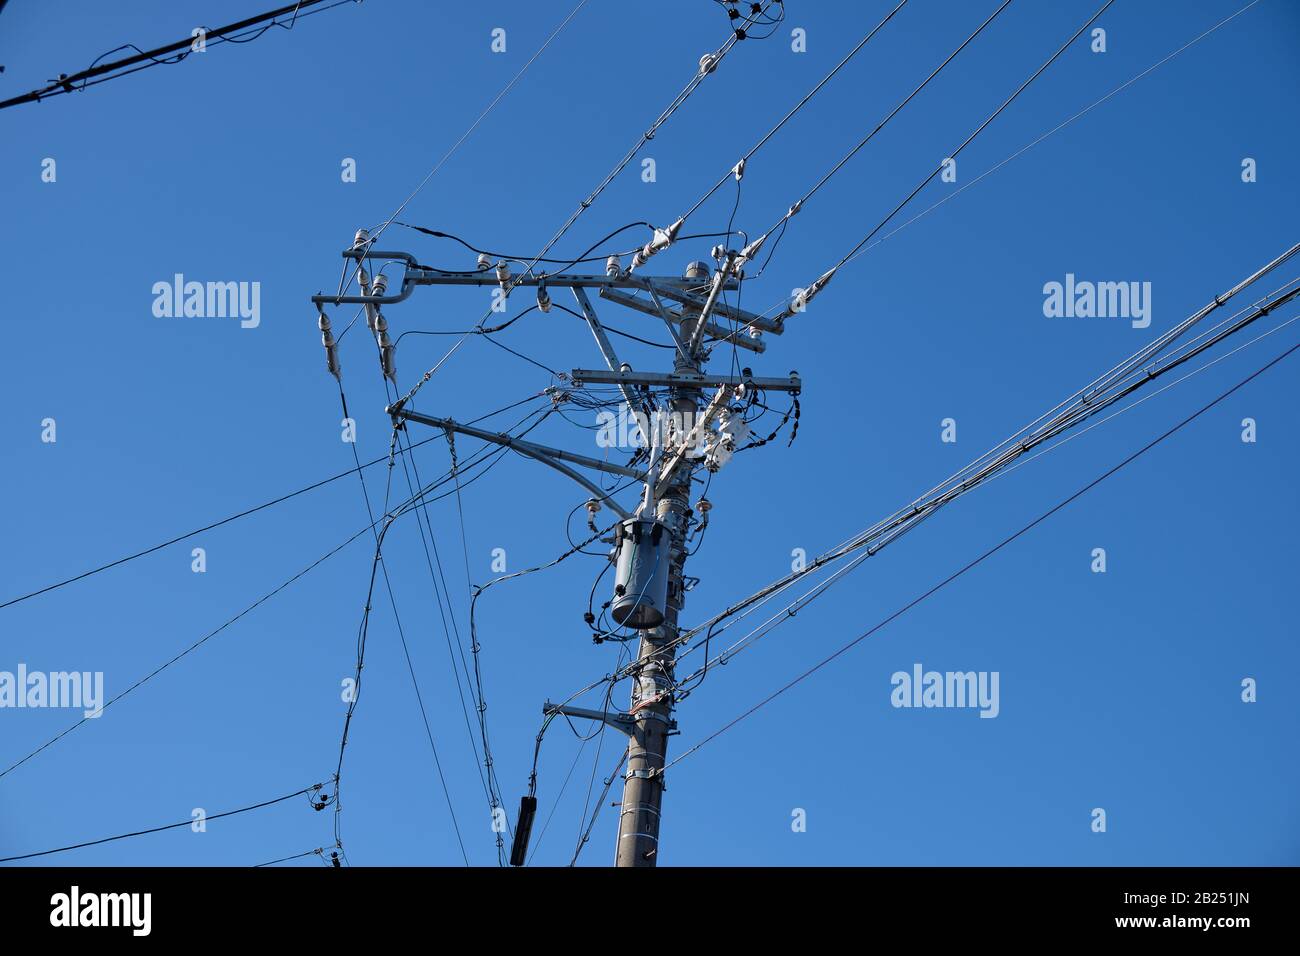 Pole with telephone and electricity cables in Tokyo, Japan. Stock Photo